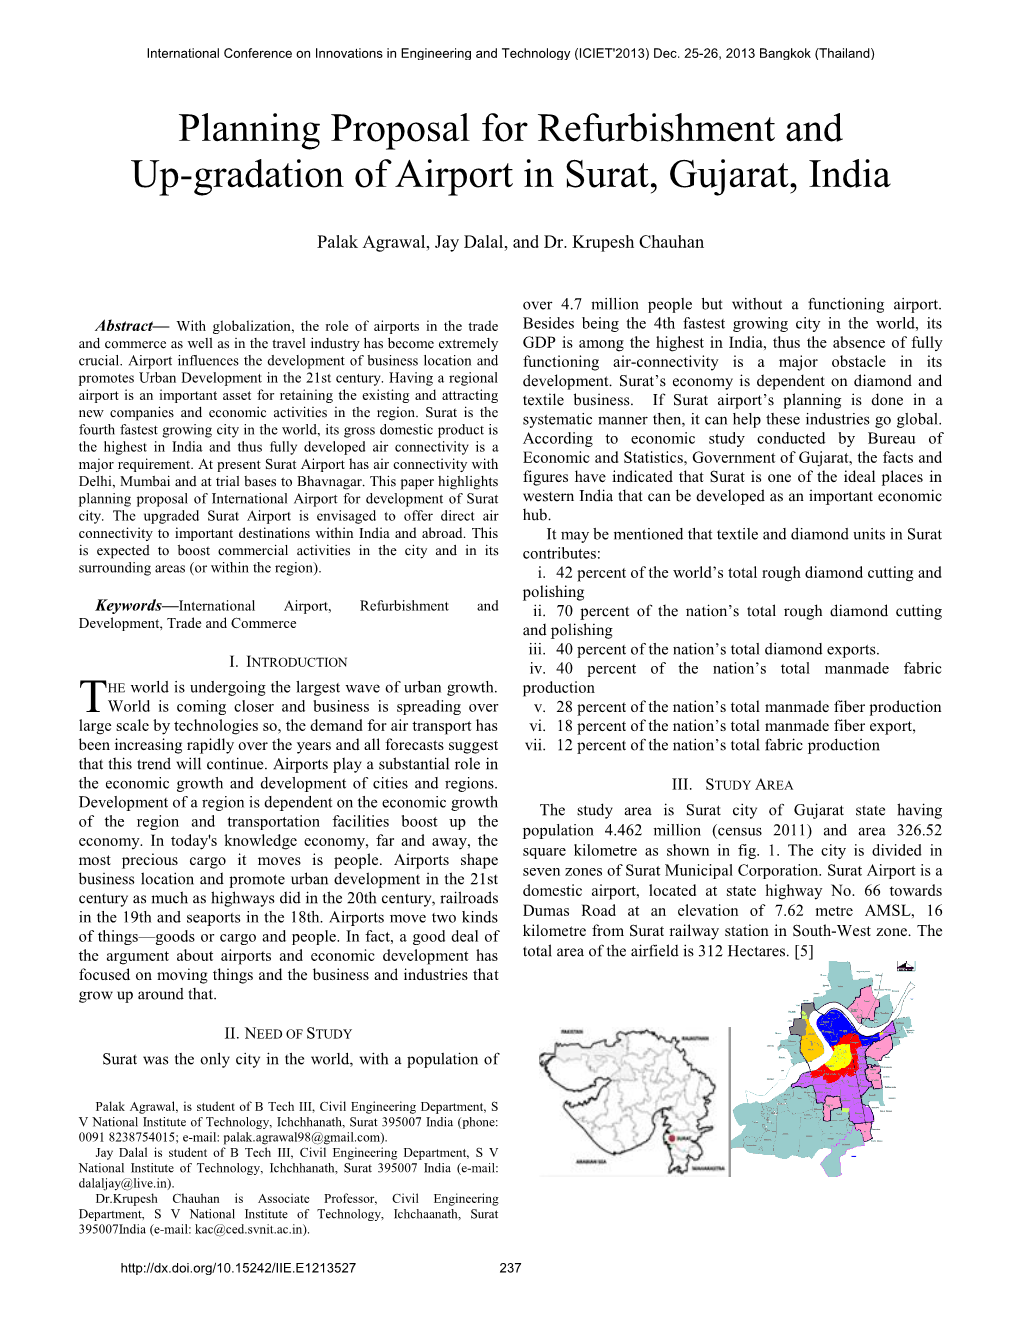 Planning Proposal for Refurbishment and Up-Gradation of Airport in Surat, Gujarat, India